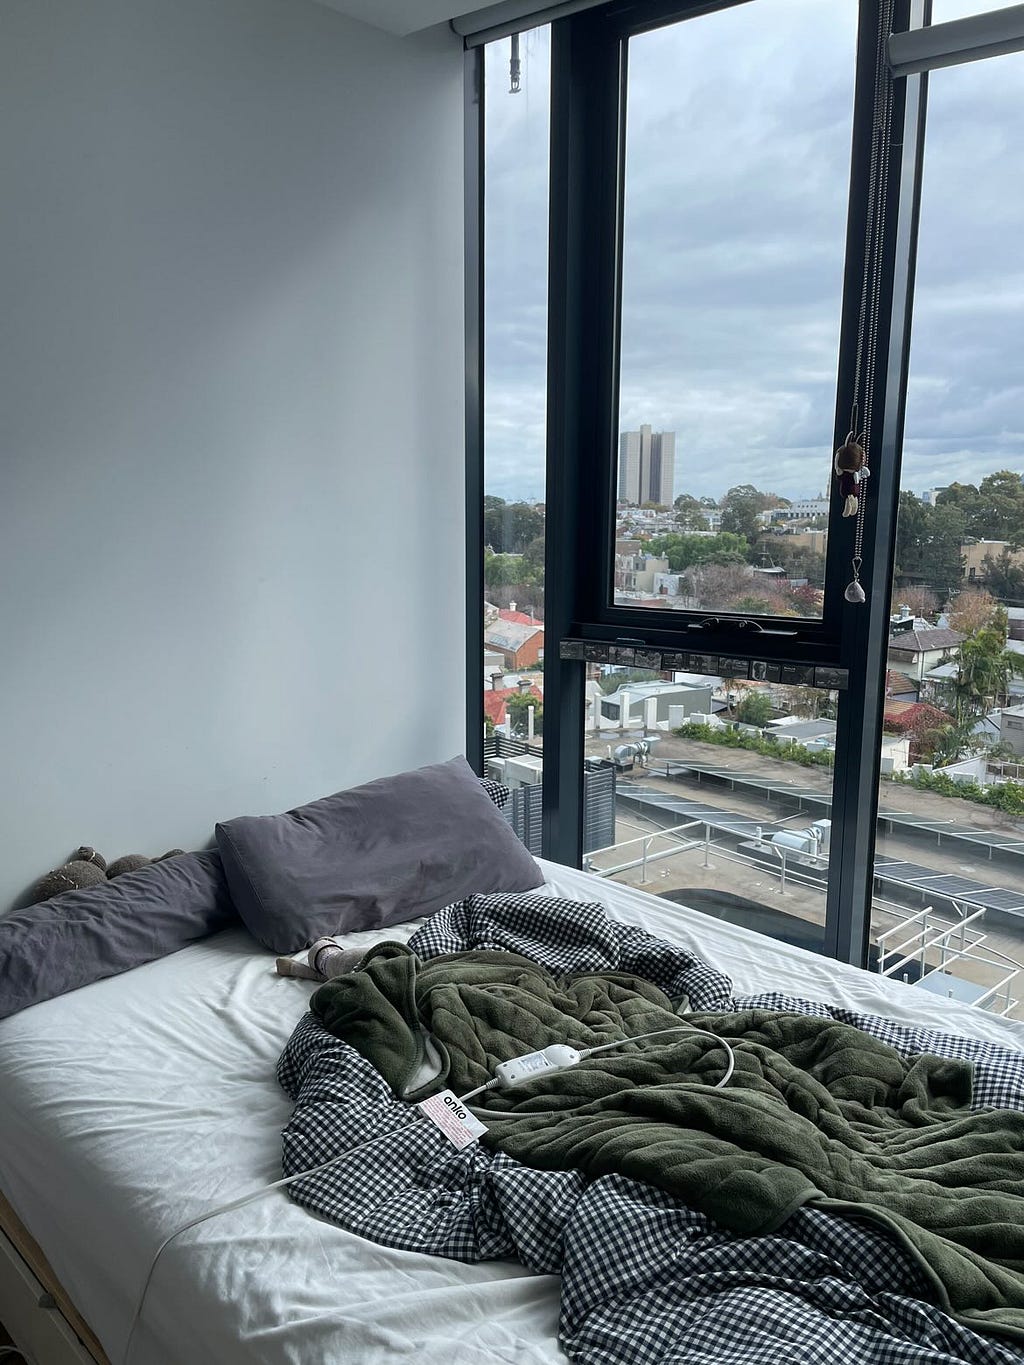 Photo of a bed with messy blankets and a big window looking out into the city.